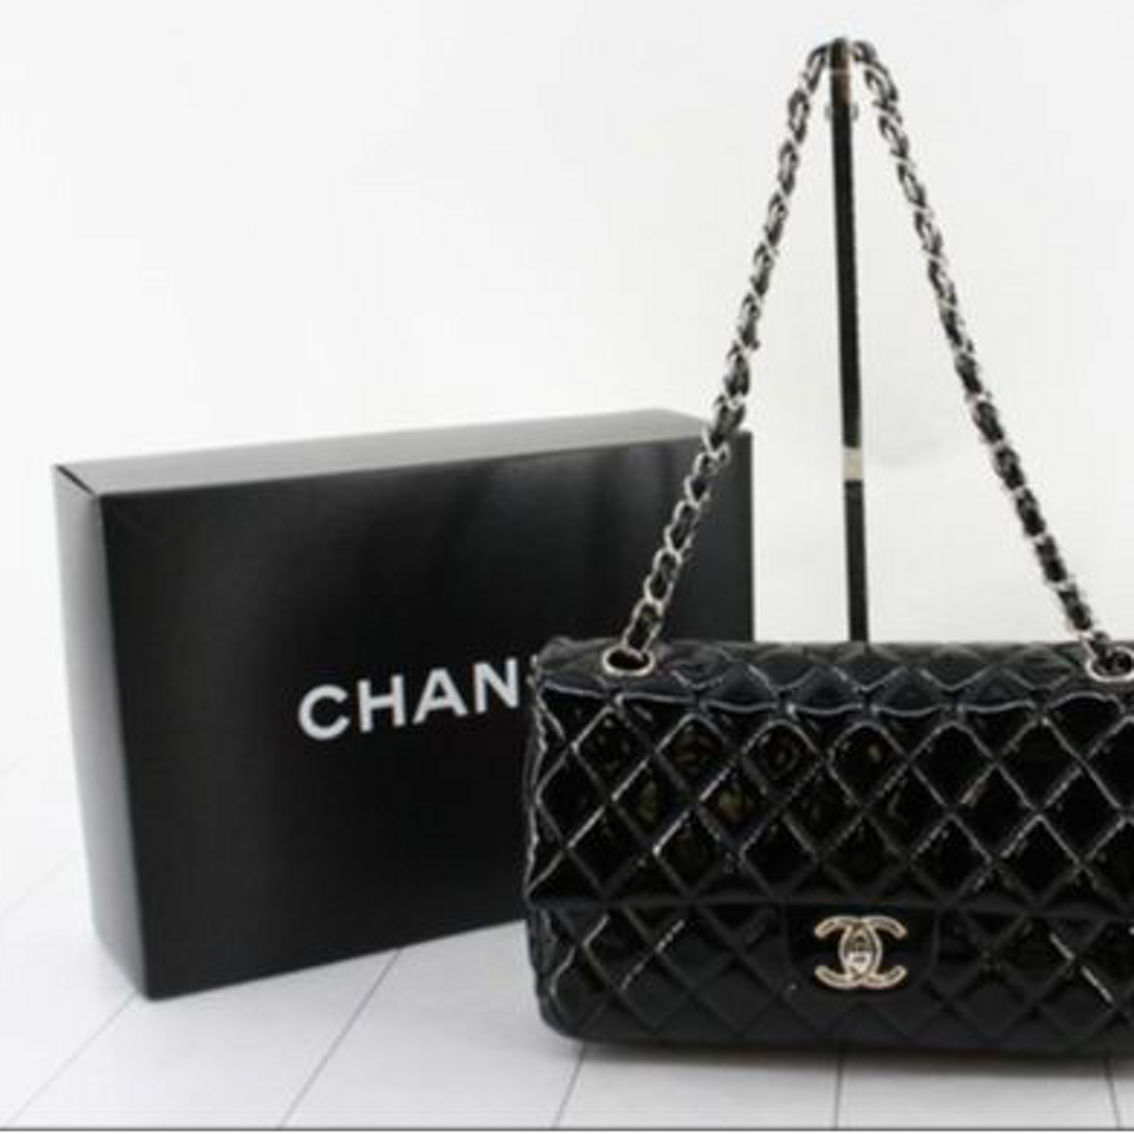 Chanel Black Patent Calf Quilted Calf Leather Medium Classic Double Flap Handbag - Image 4 of 5